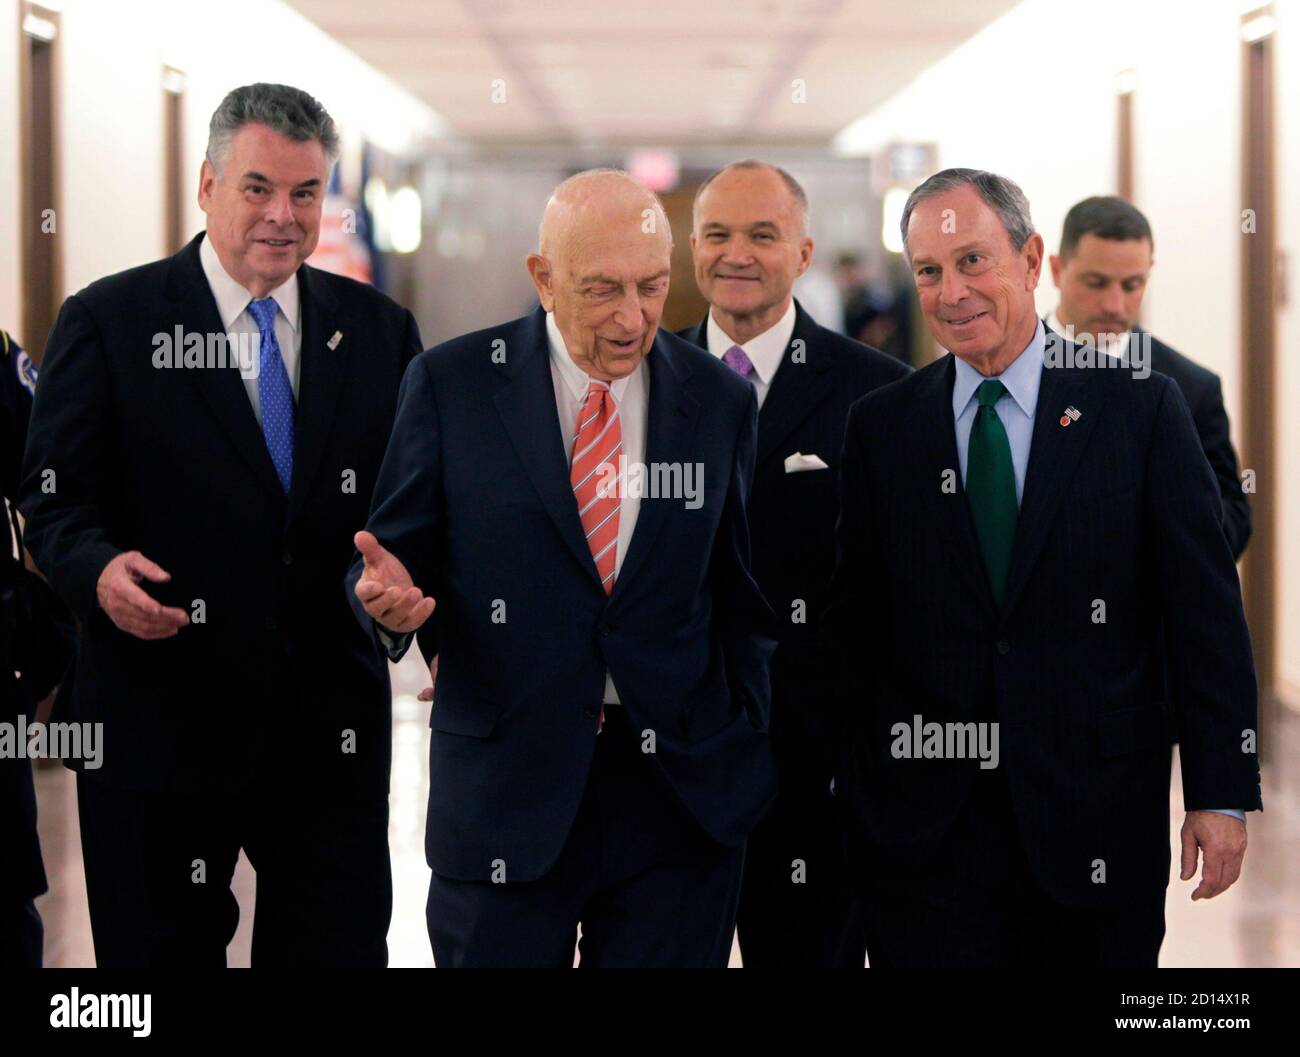 New York City Mayor Michael Bloomberg (2nd R), speaks to Sen. Frank Lautenberg (D-NJ) as they walk down a hallway in Senate Dirksen Building with Rep. Peter King (R-NY) (L) and New York City Police Commissioner Raymond Kelly (3rd R) after their testimony before the Senate Homeland Security and Governmental Affairs Committee on Capitol Hill in Washington May 5, 2010. REUTERS/Yuri Gripas (UNITED STATES - Tags: POLITICS CRIME LAW) Stock Photo